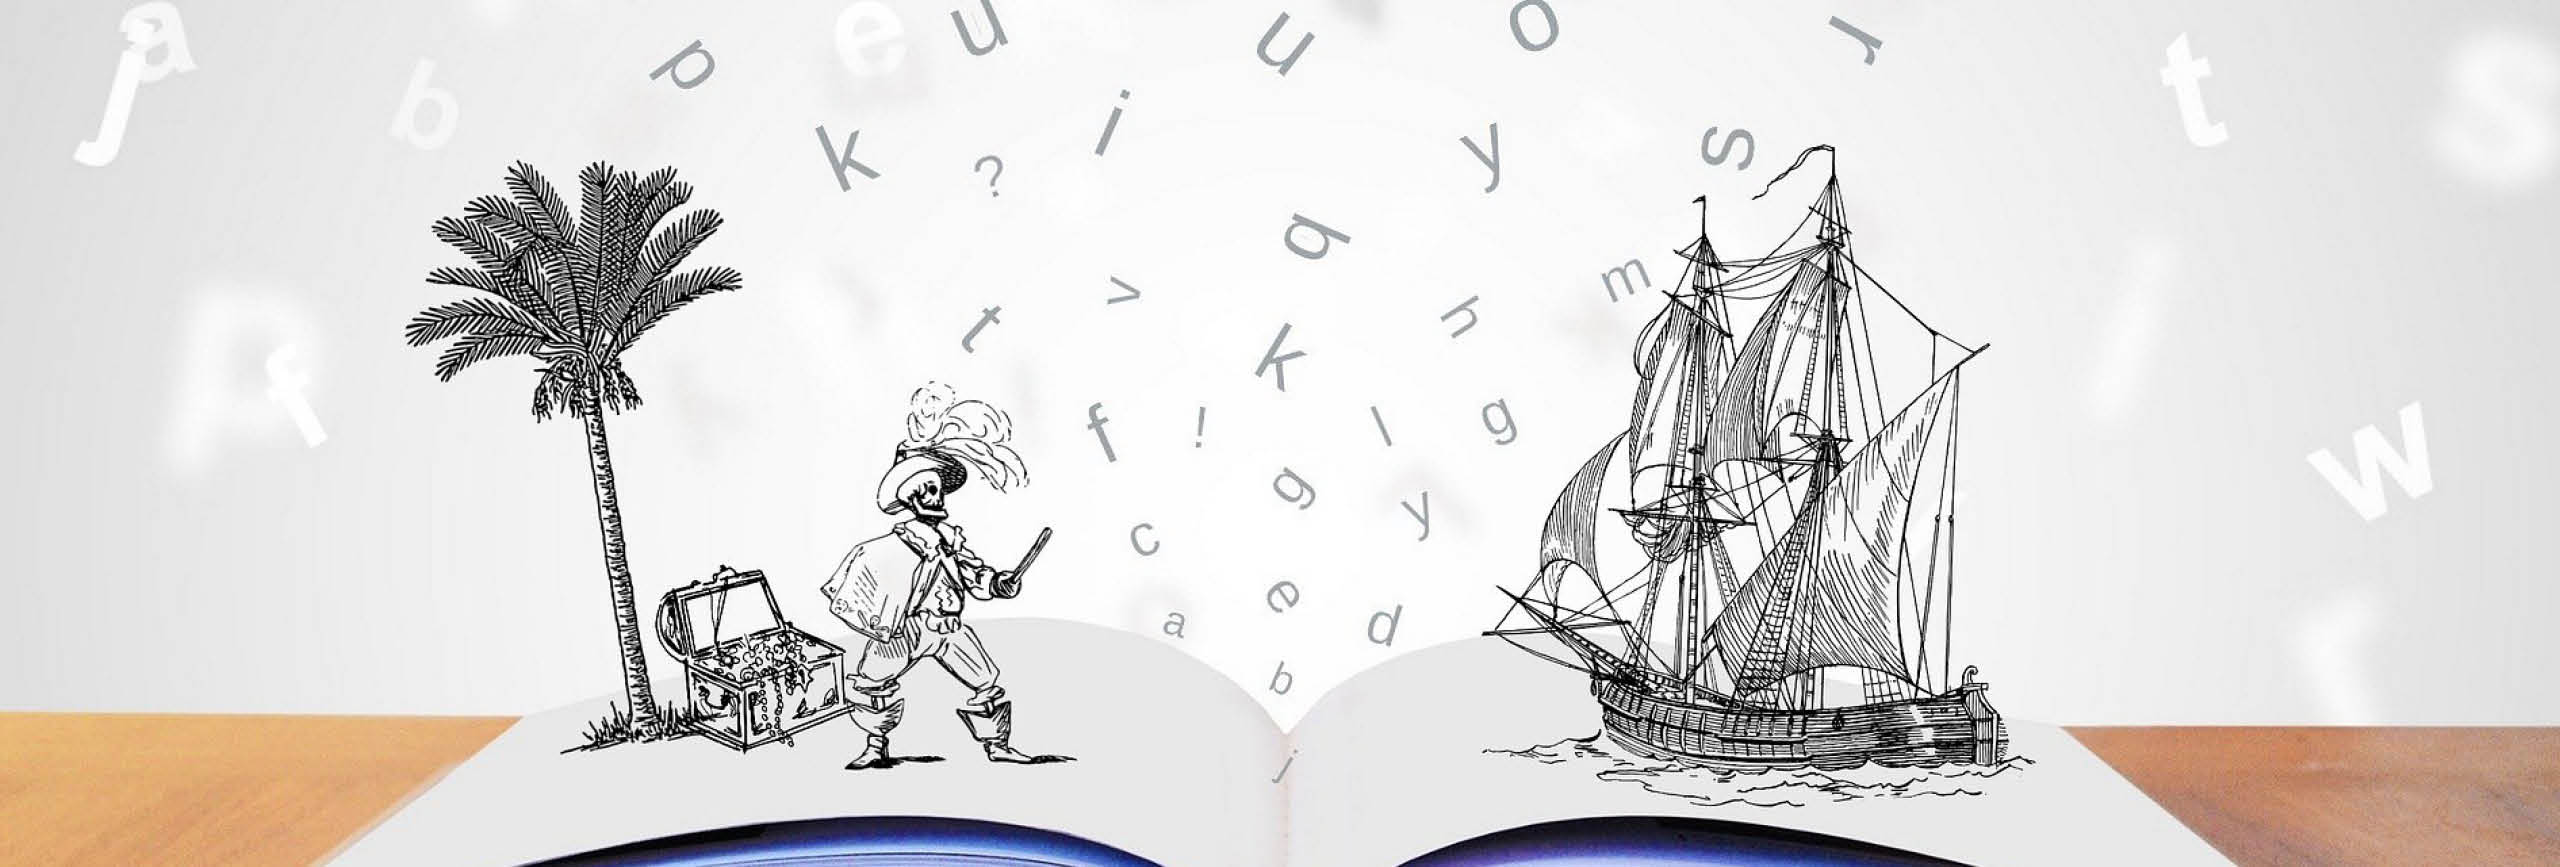 Animated characters jumping from the pages of a book.